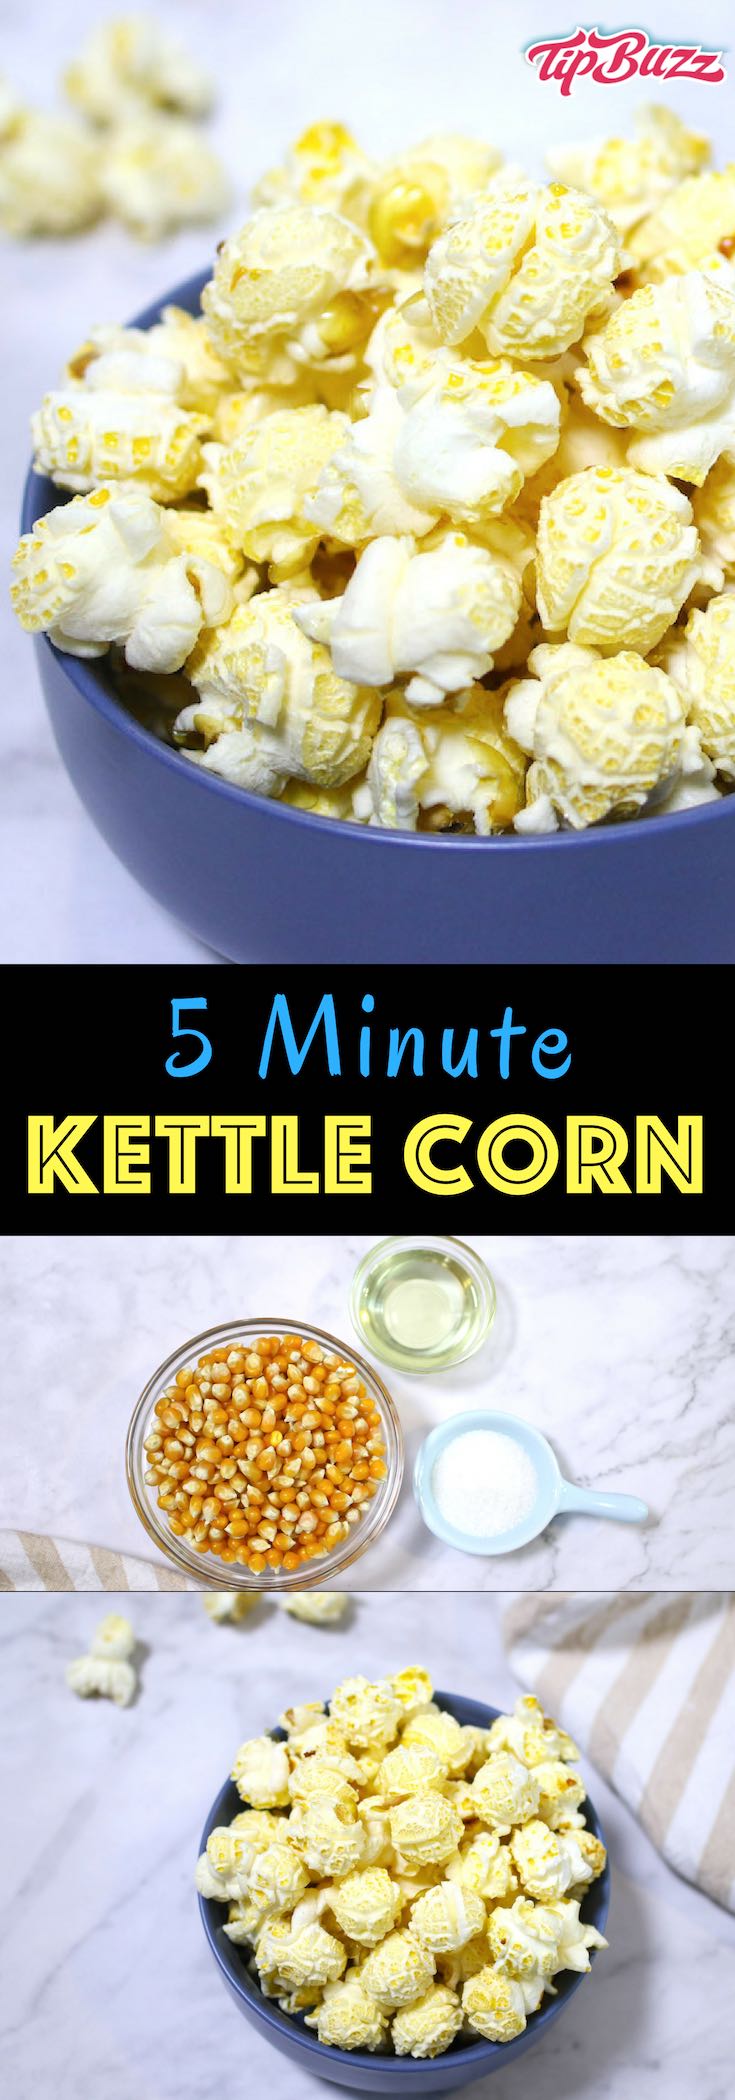 Kettle corn is an addictive sweet-and-salty snack that's light and airy! It’s the perfect finger food for snacking as well as movie night, game day and any other party. 